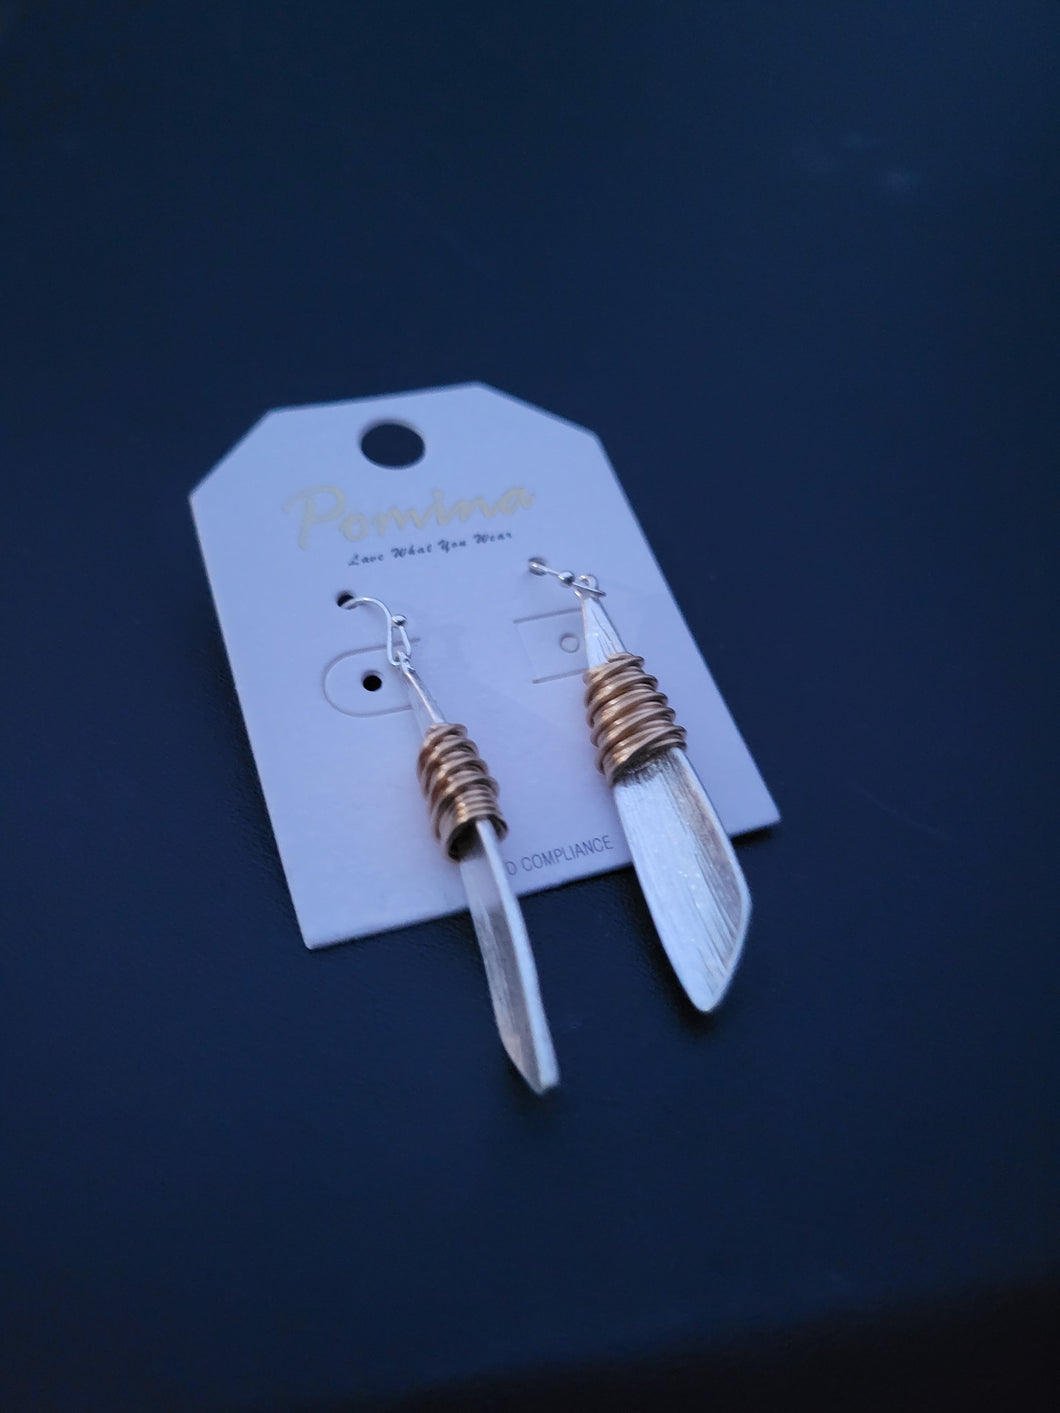 Metal Drop Earrings with Twine Accent